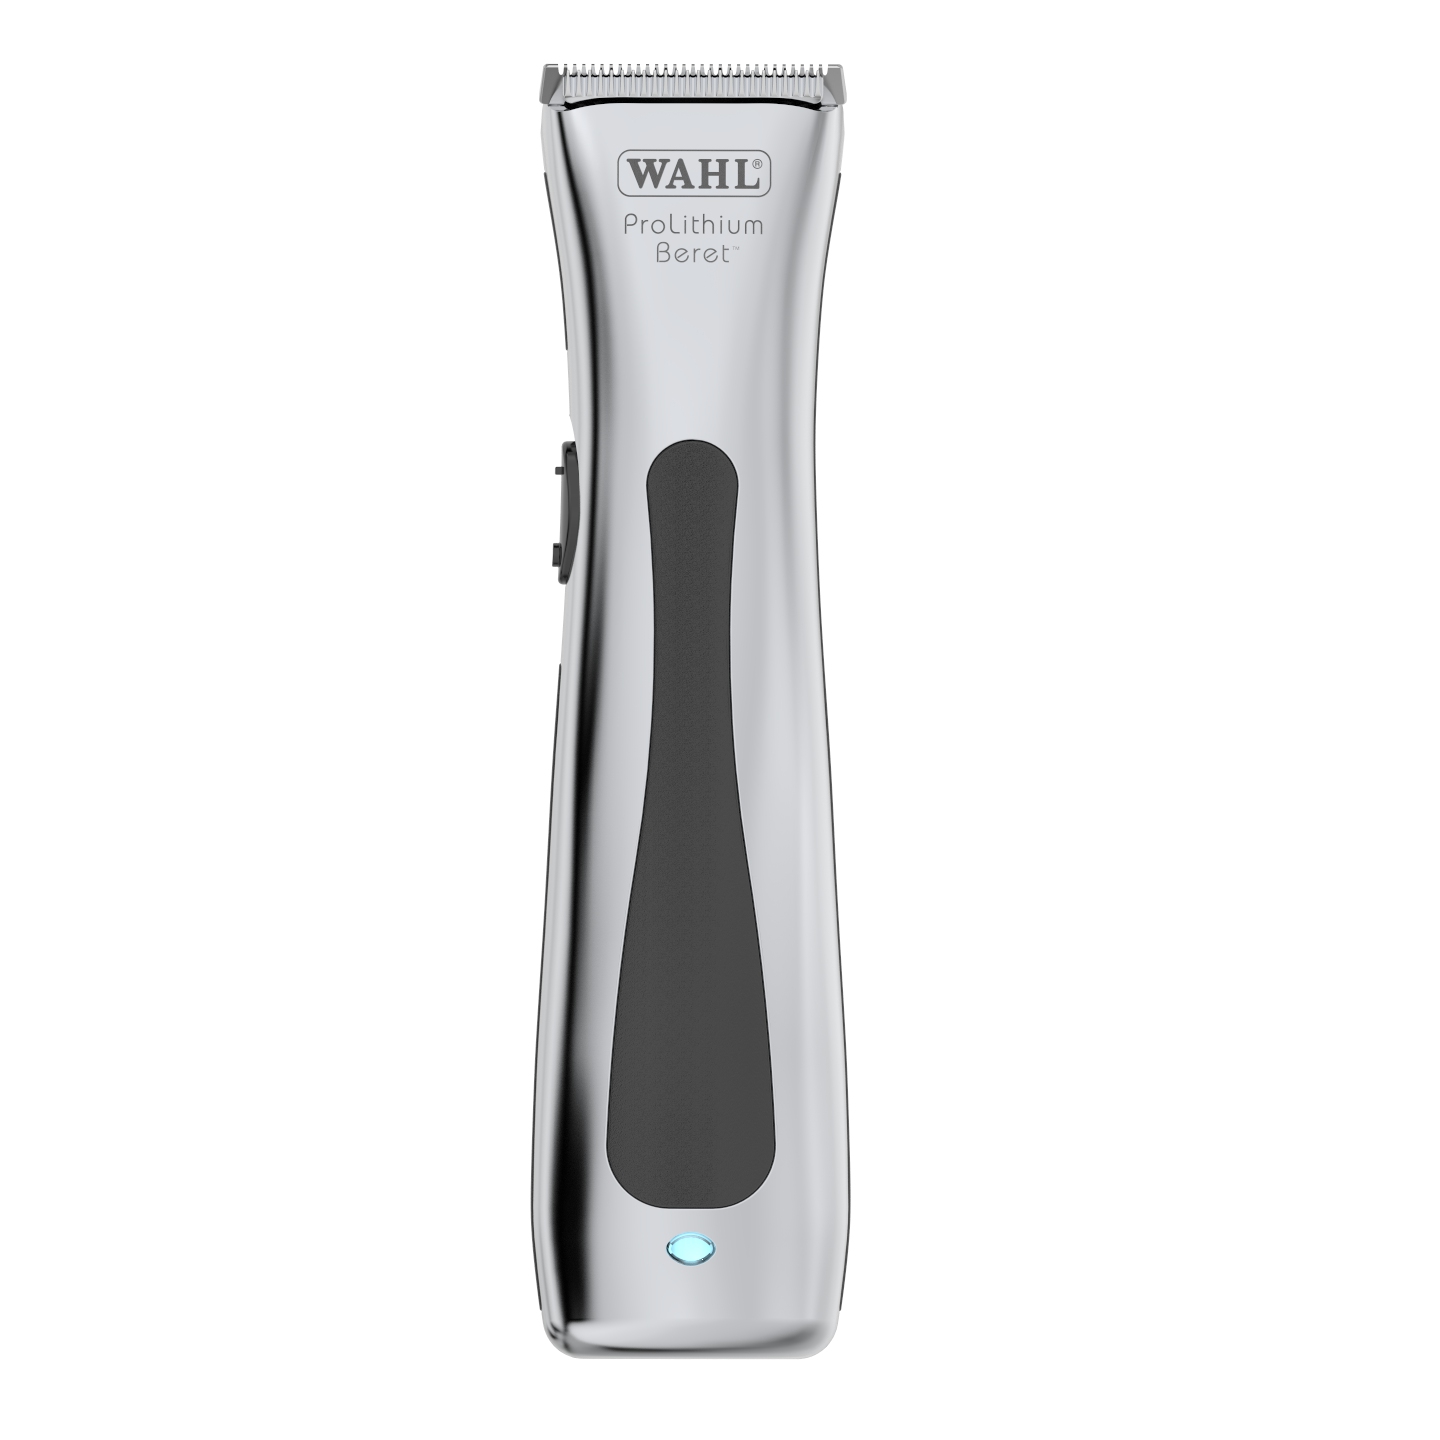 wahl small beard trimmer